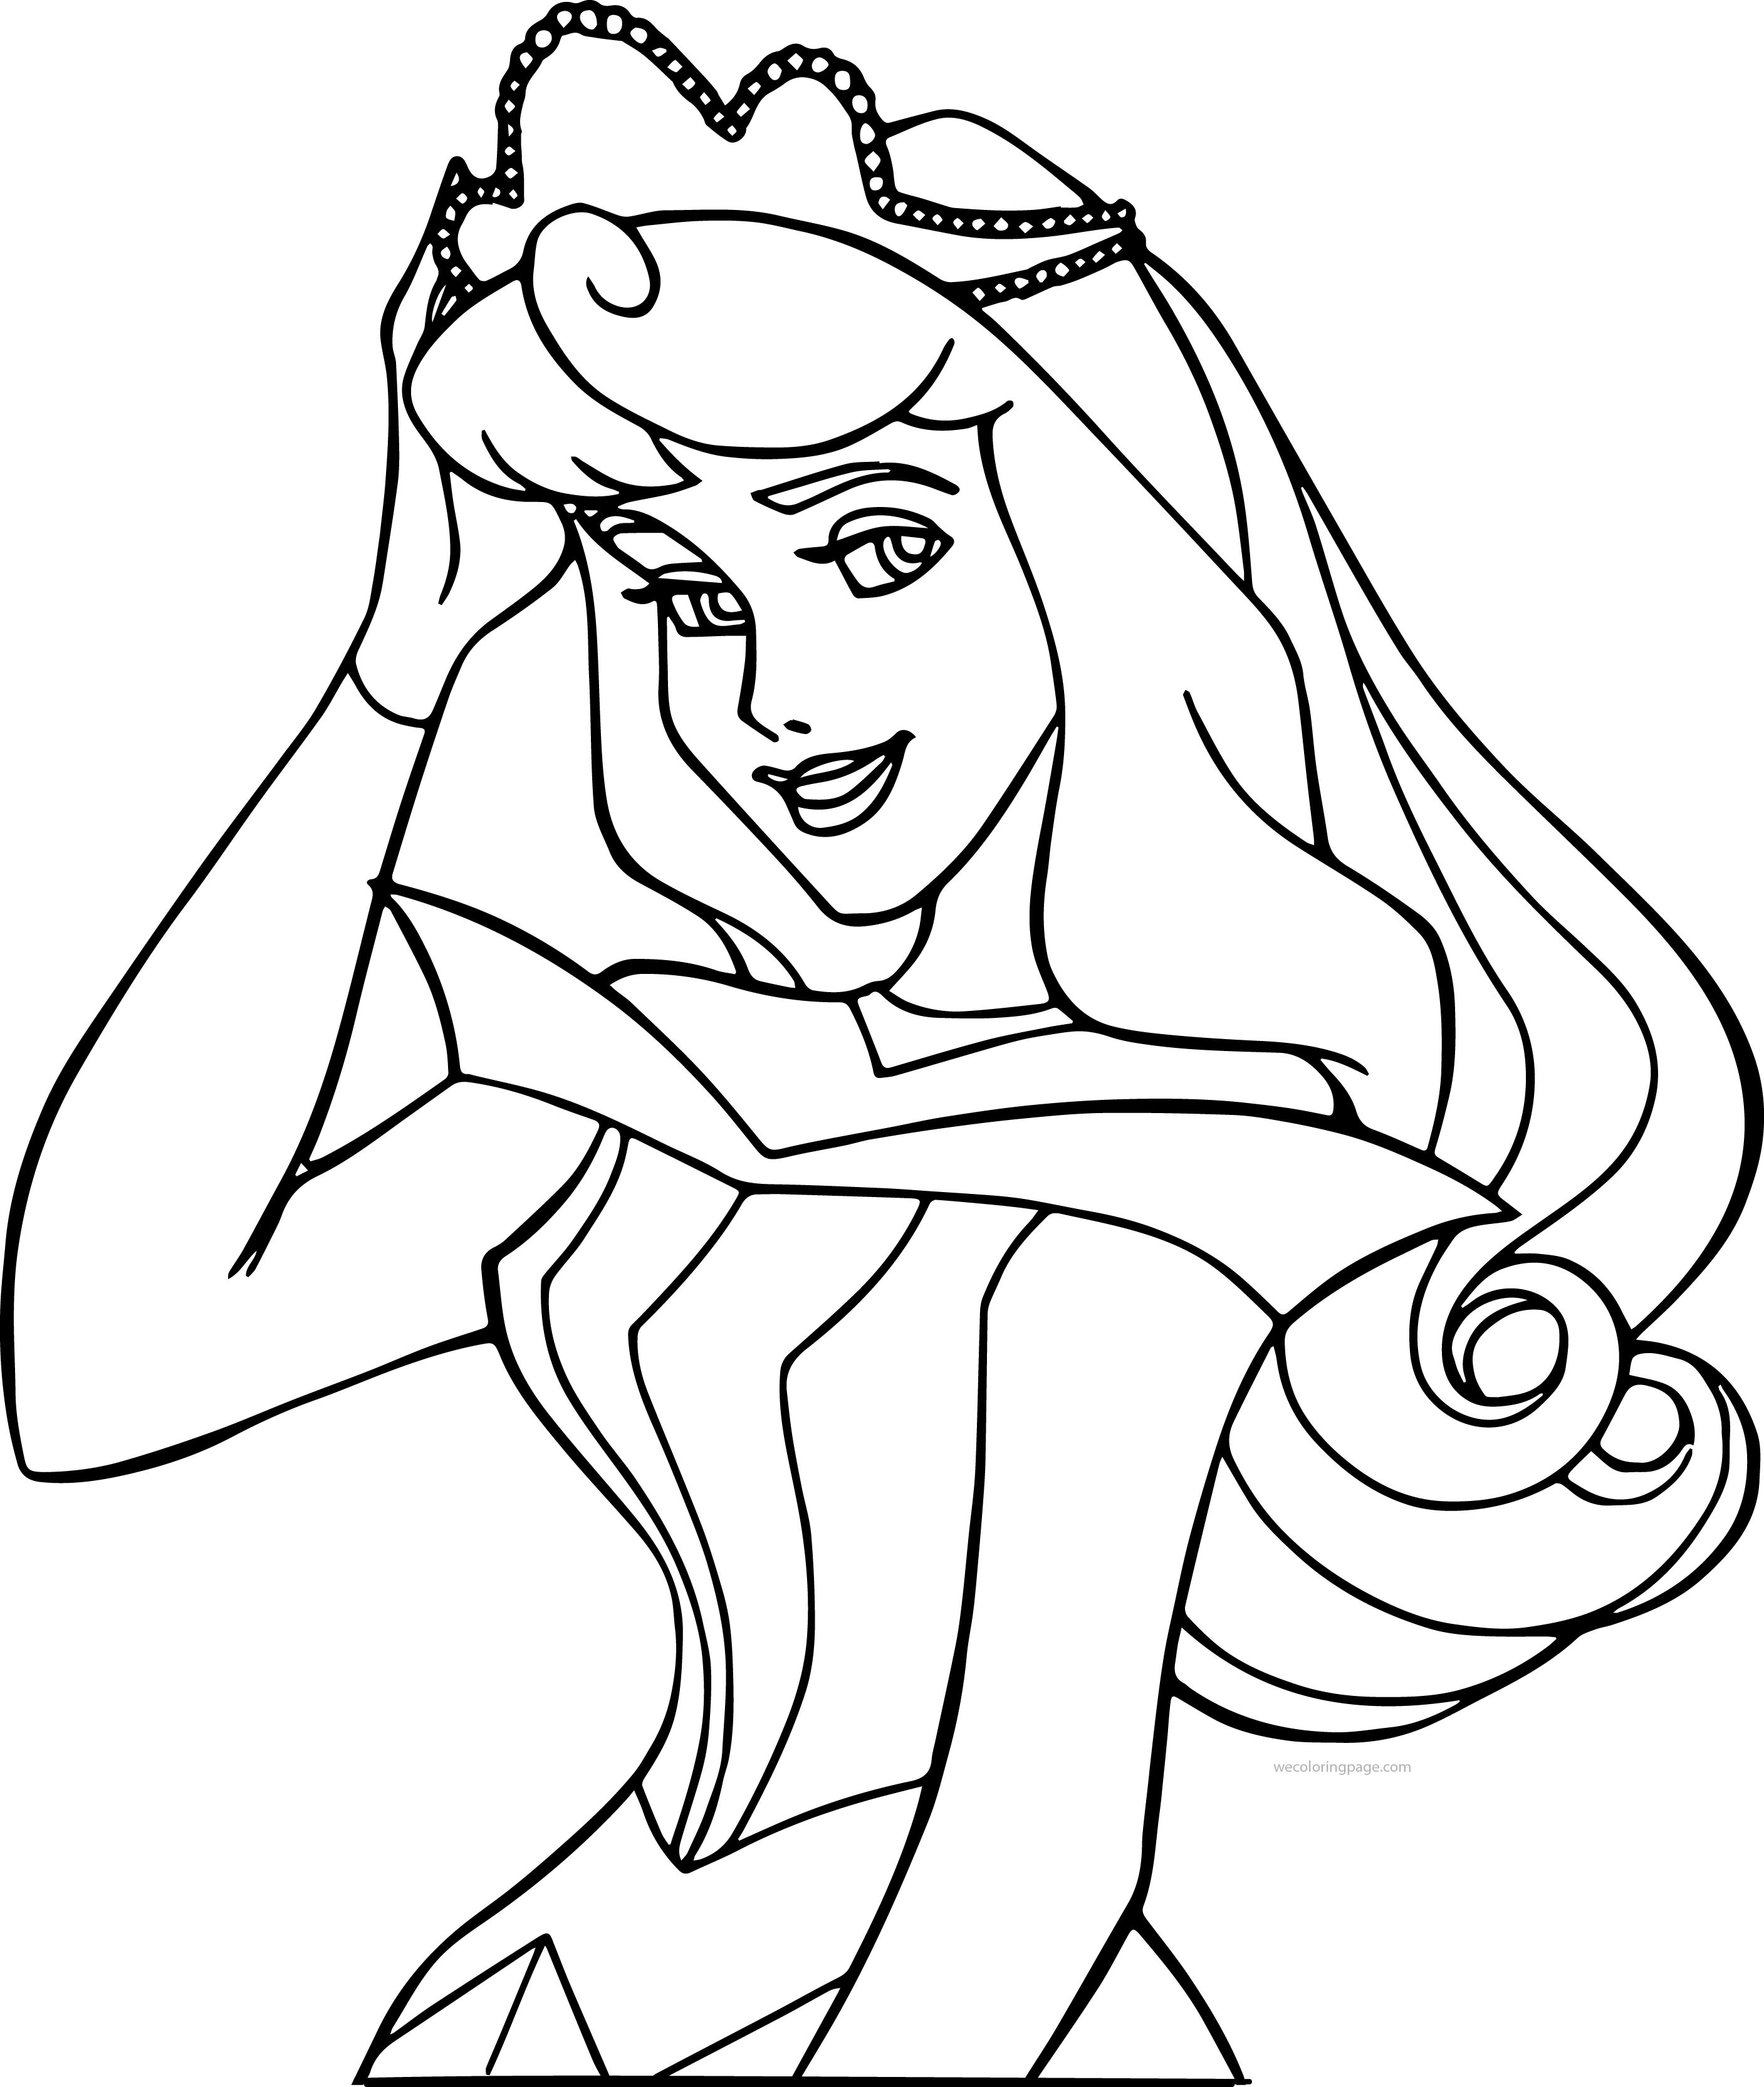 Sleeping Beauty Coloring Pages
 Disney Aurora Sleeping Beauty At Coloring Pages